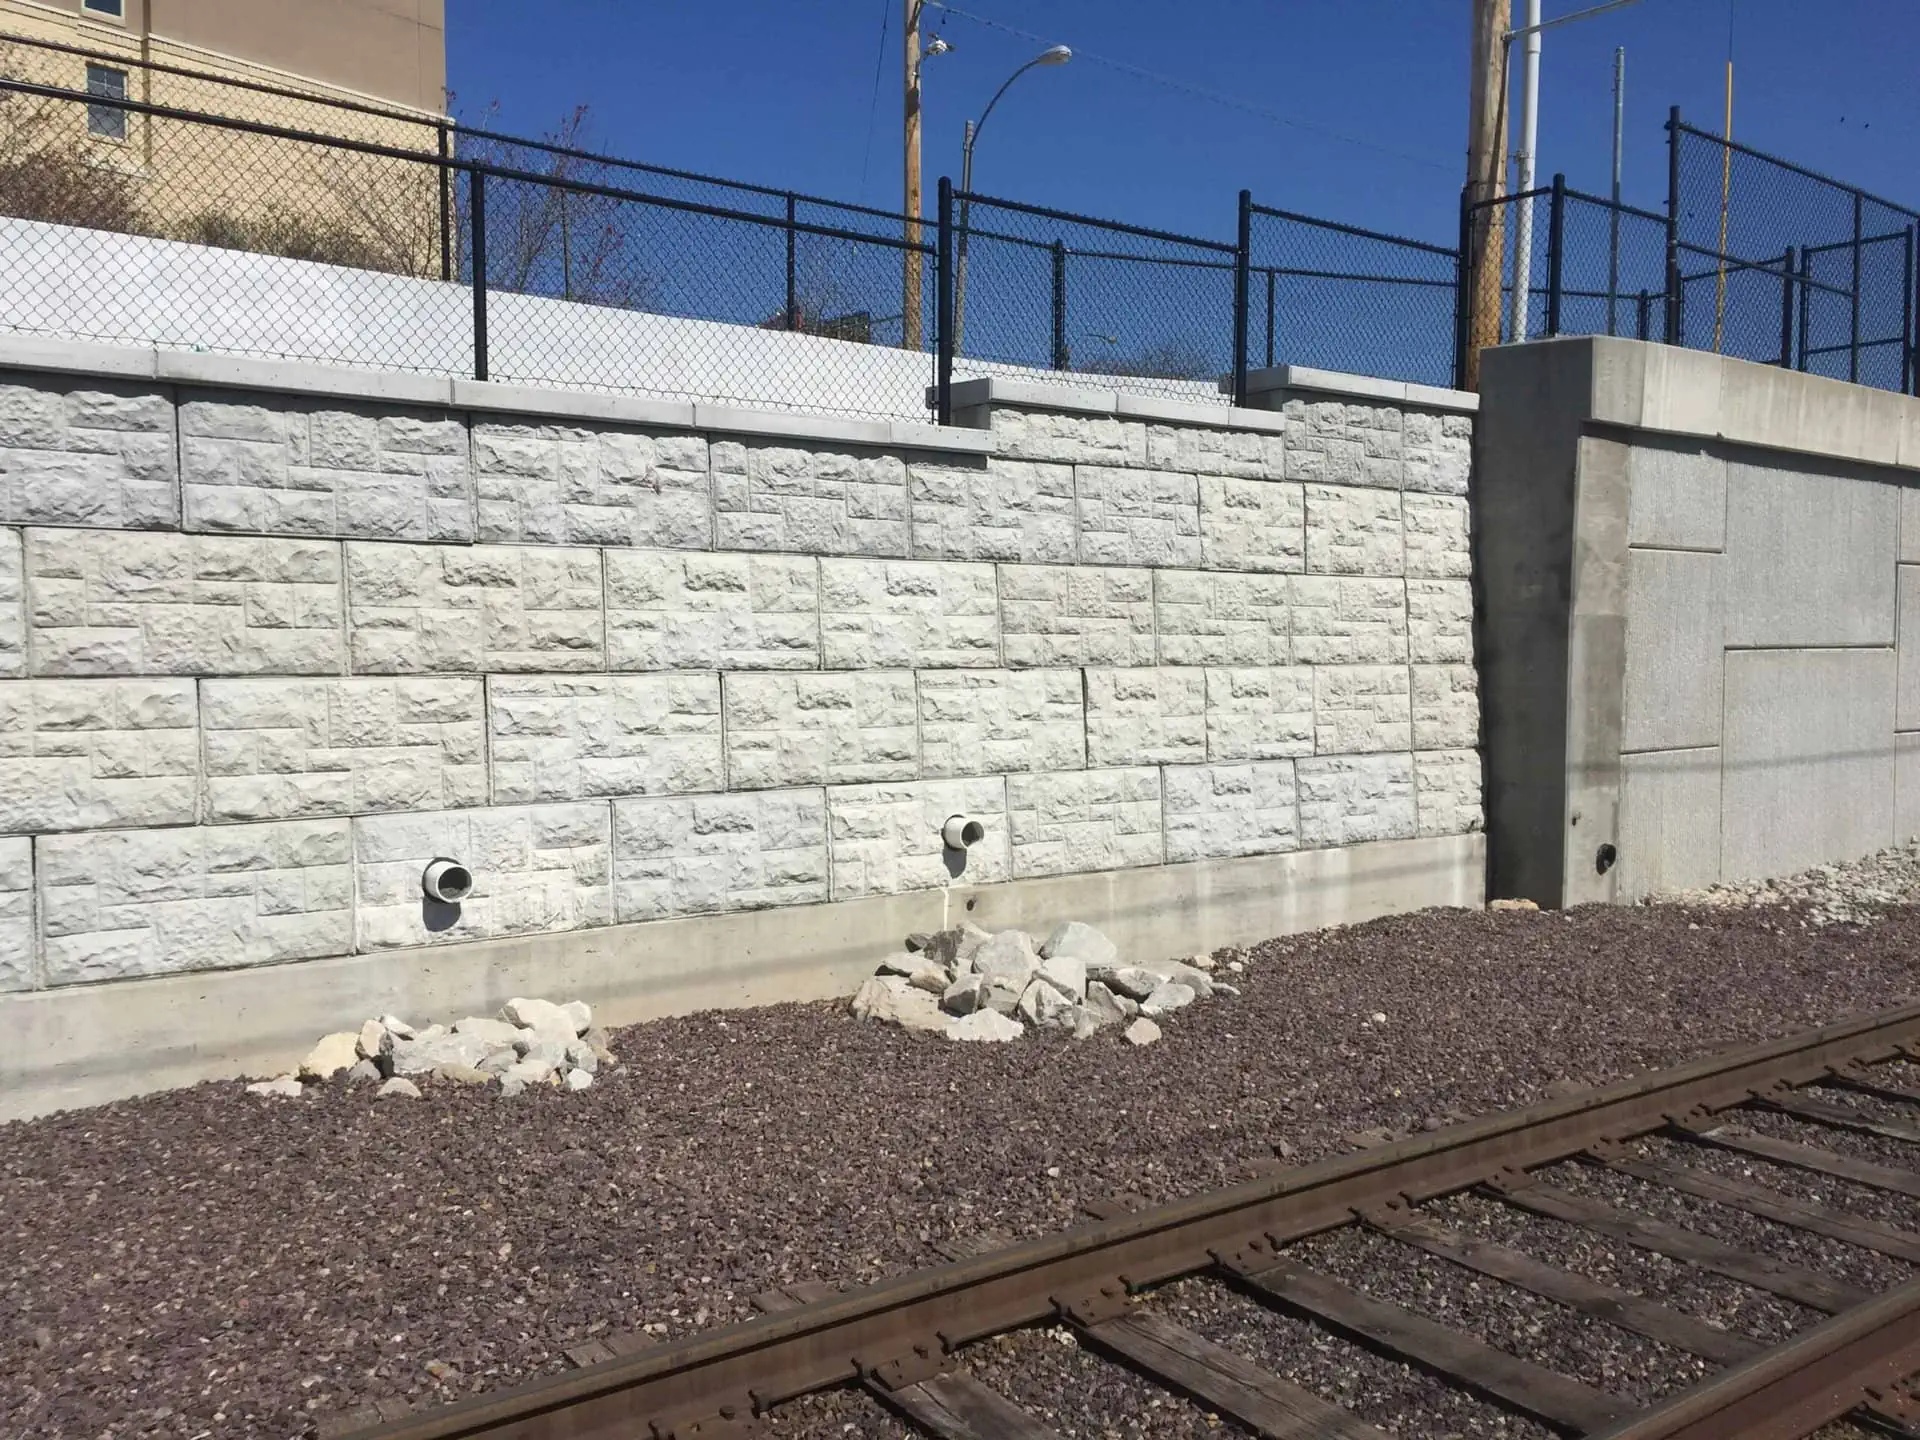 MagnumStone railway retaining wall with through-wall drainage.